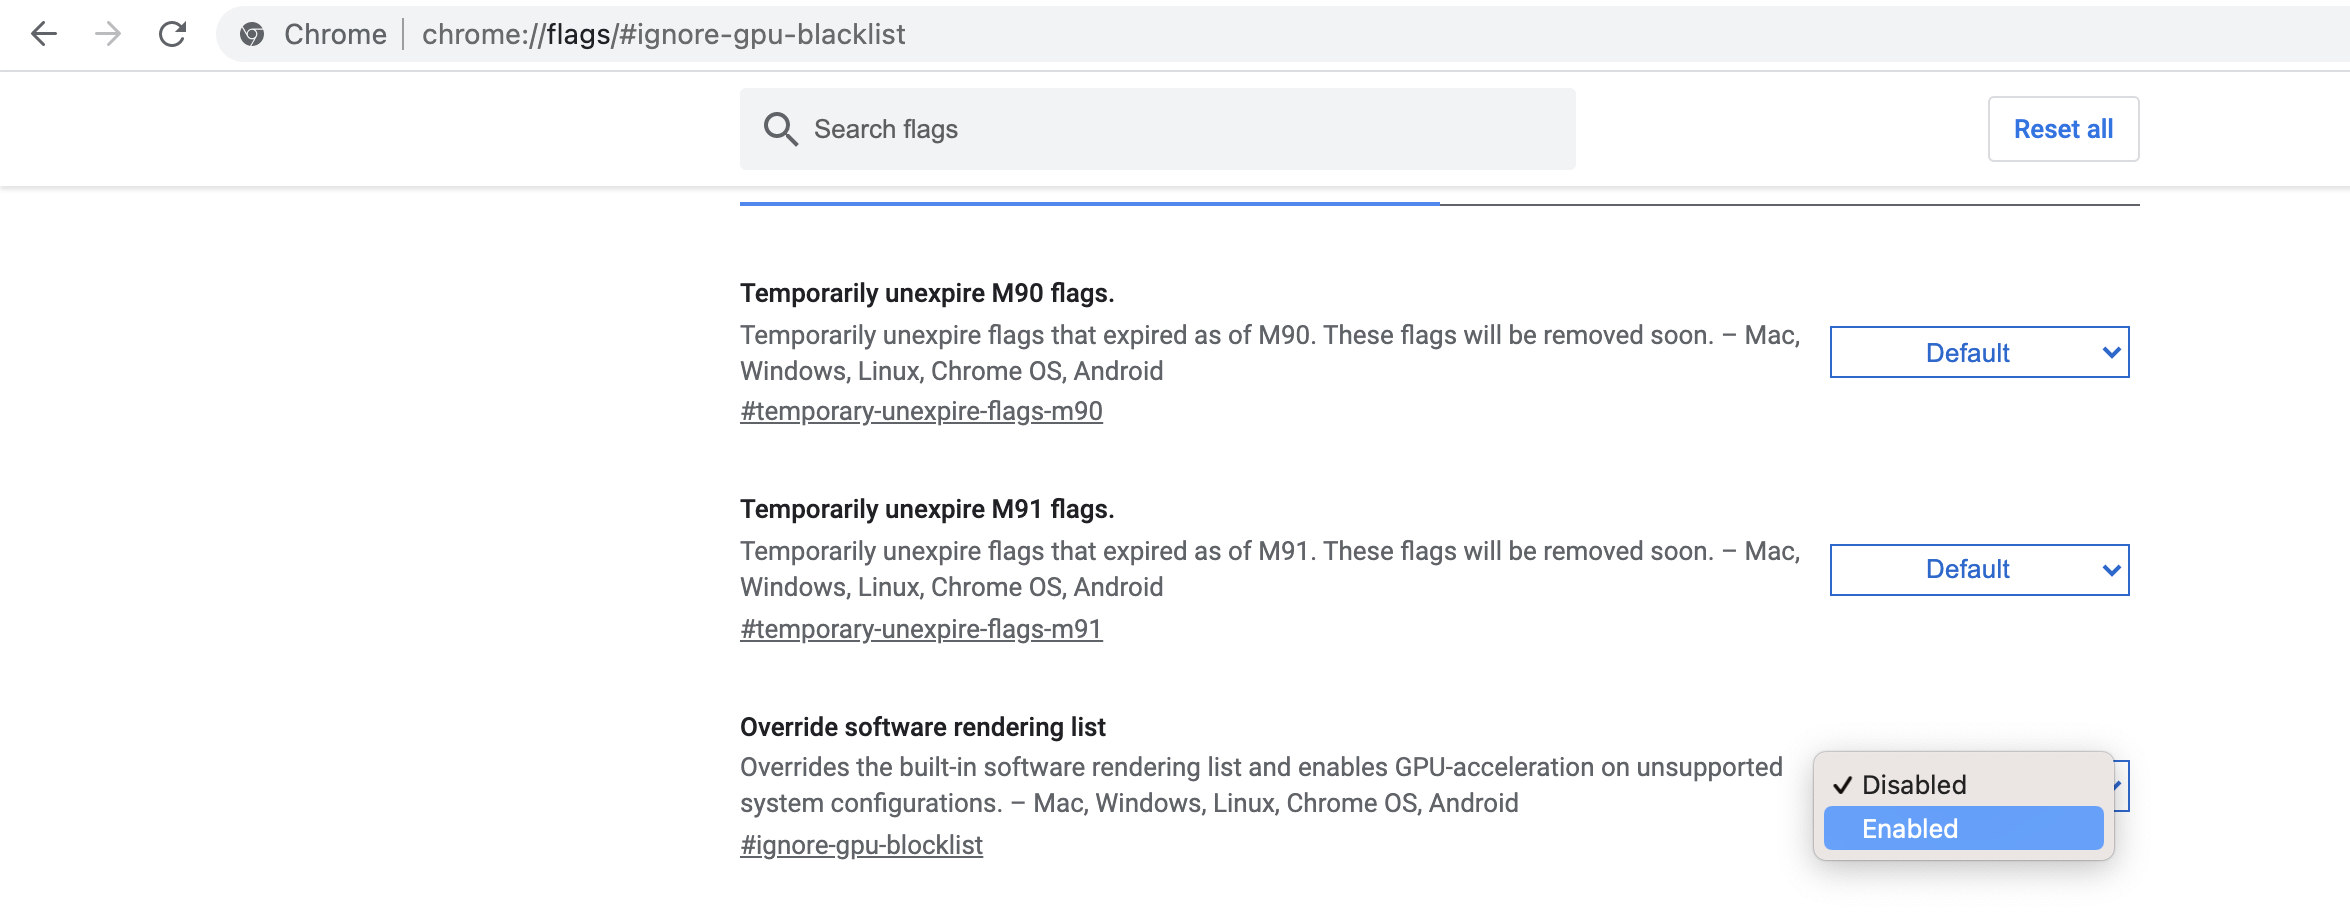 Image of overriding software rendering list on Google Chrome